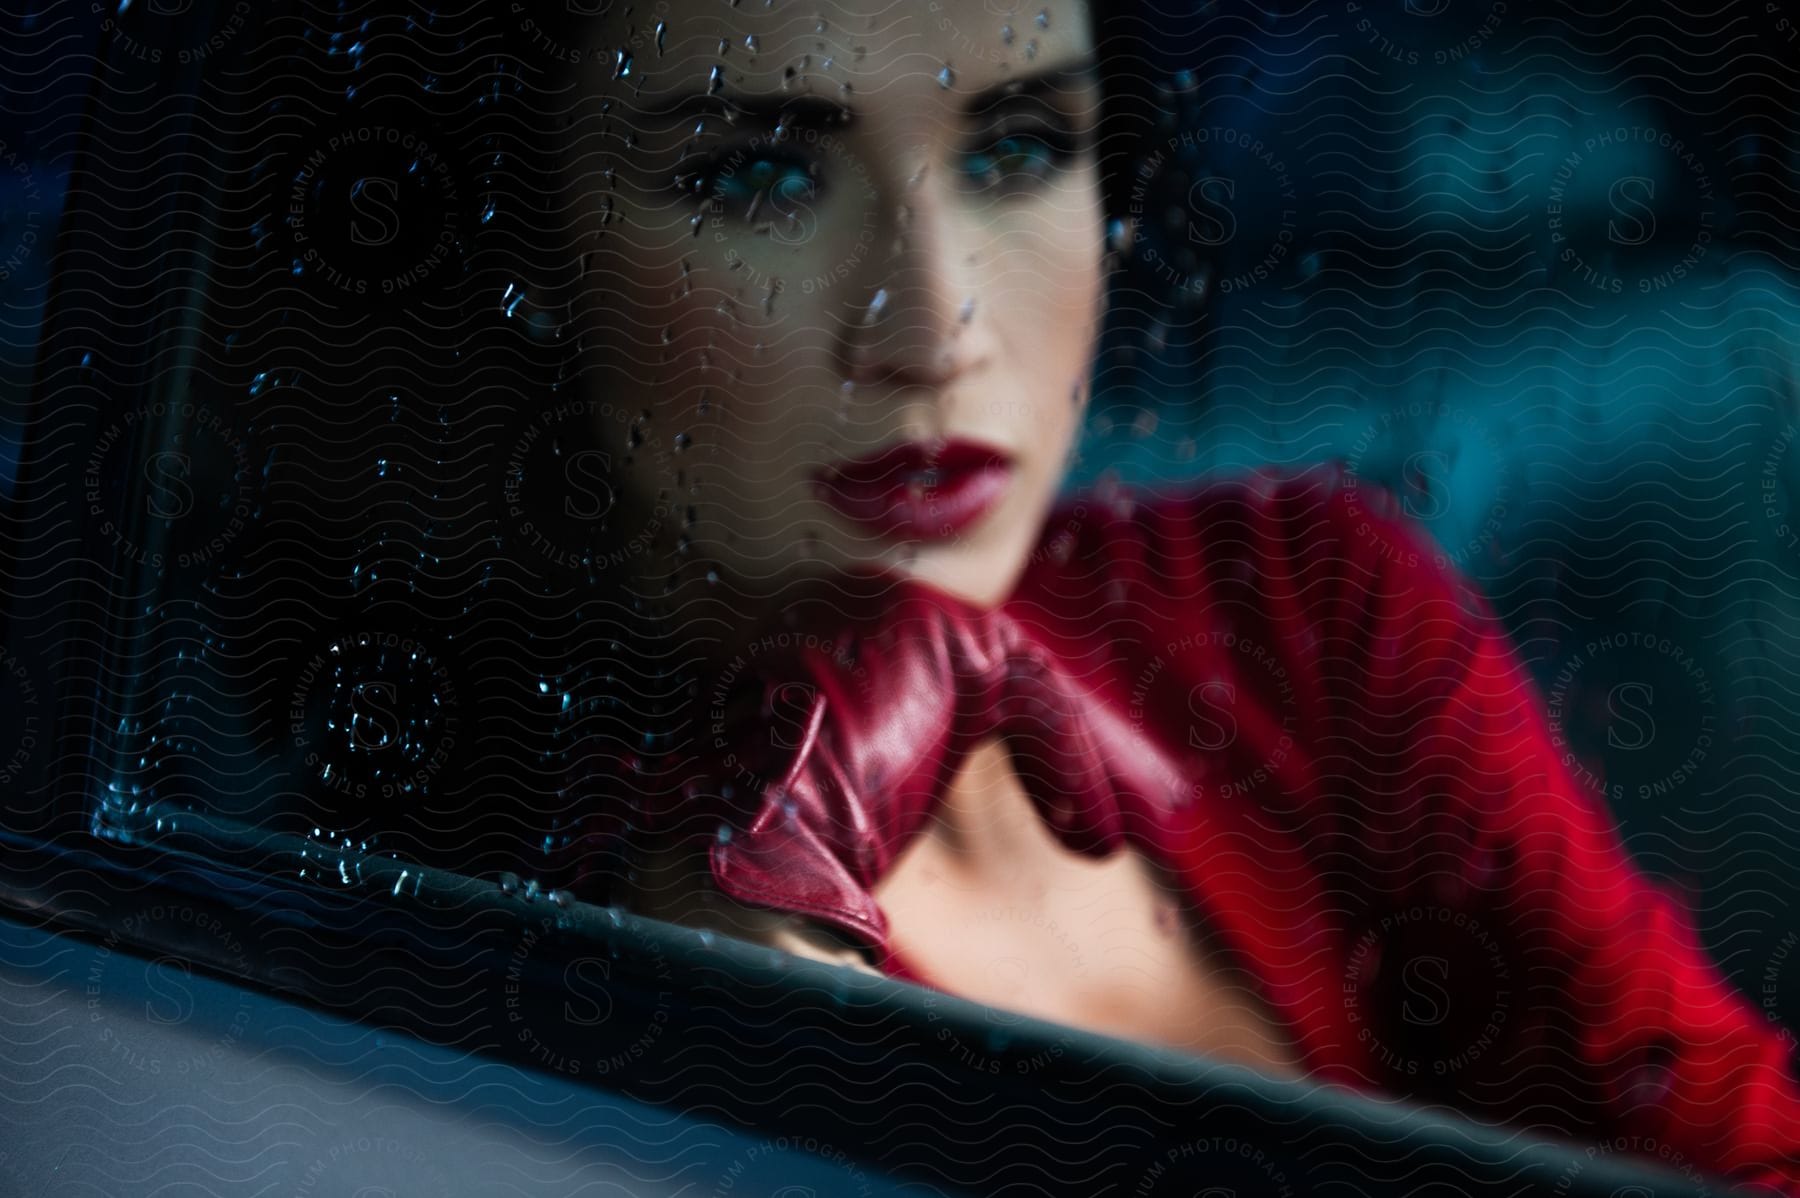 A woman in a red dress rests her chin on her hand while sitting in a black car on a rainy day